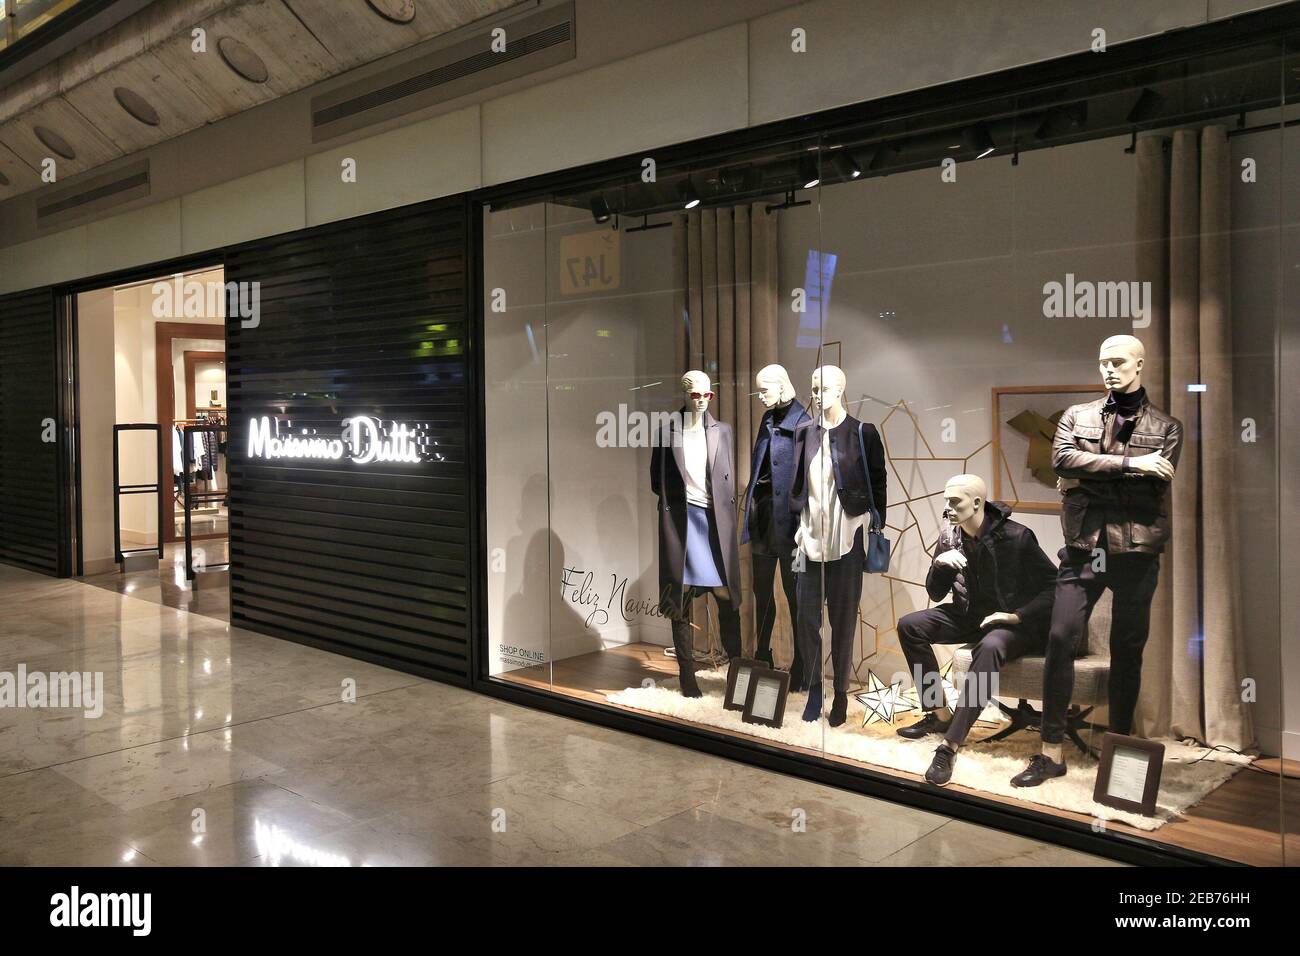 Massimo dutti shop High Resolution Stock Photography and Images - Alamy